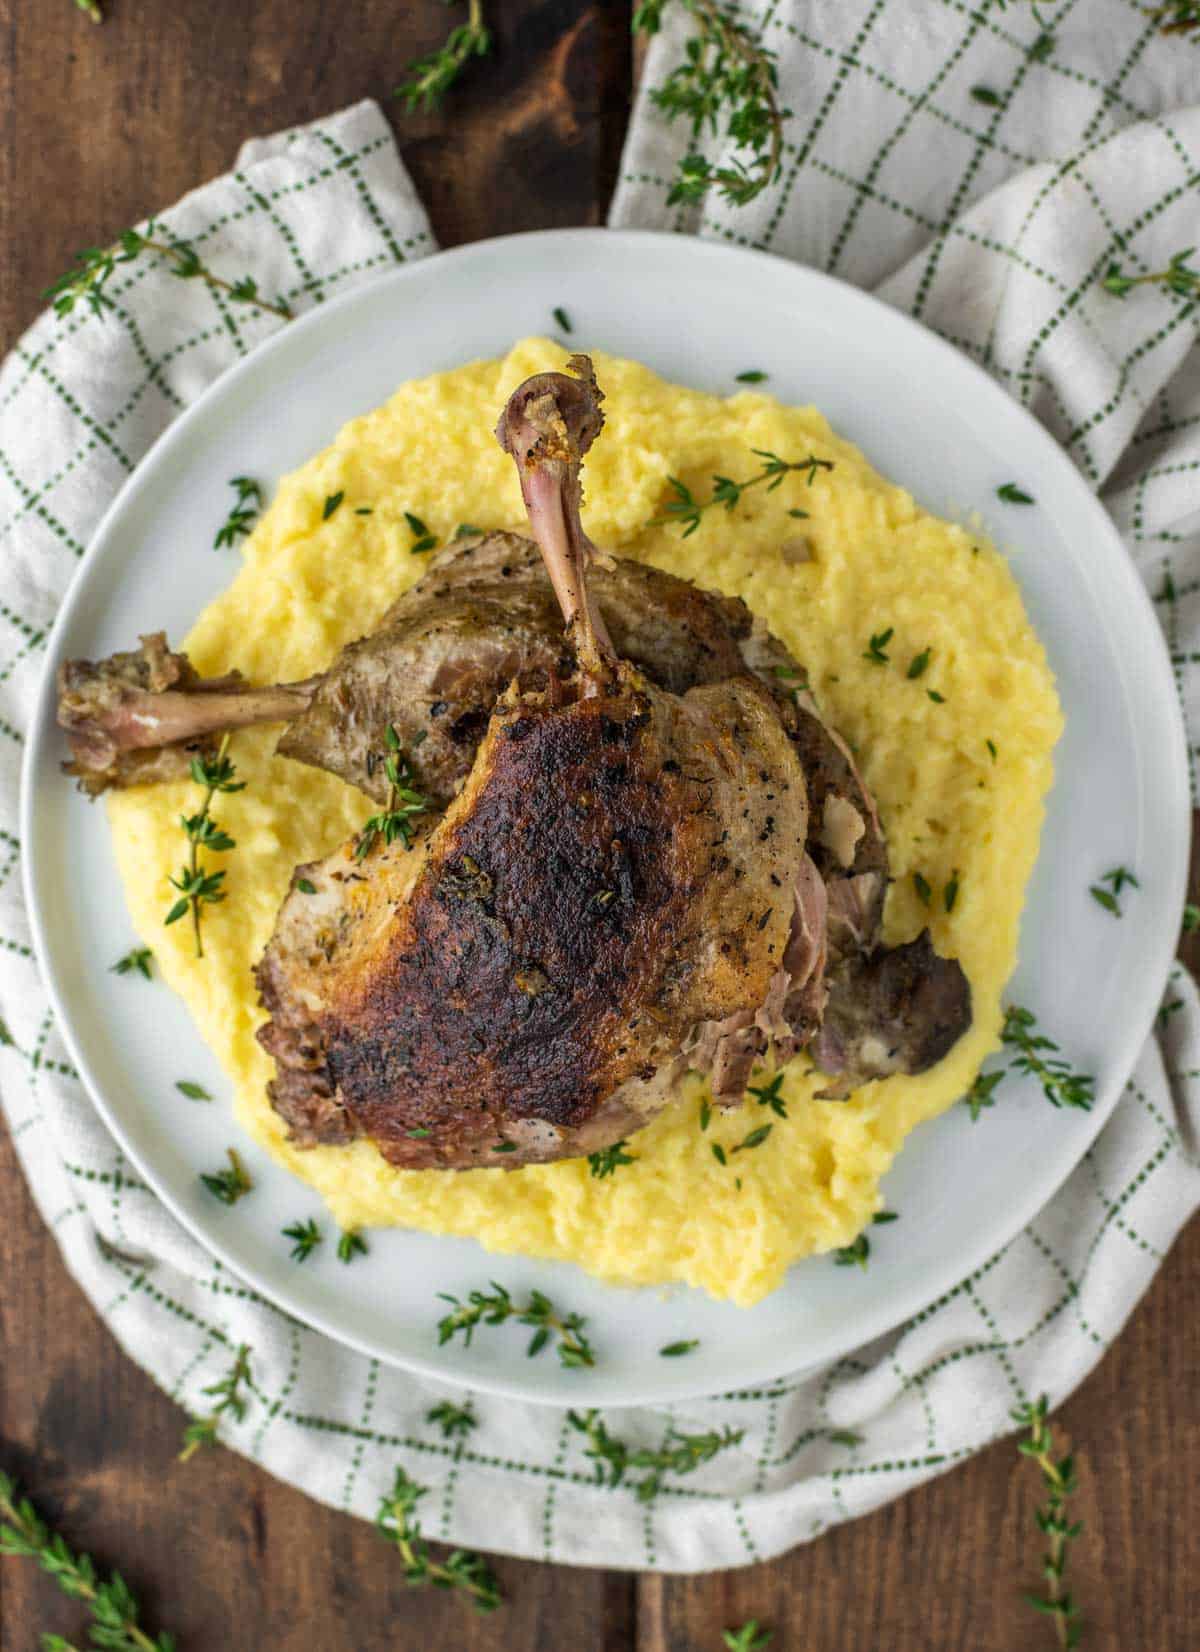 Sous Vide Duck Confit Recipe - Melt in Your Mouth Worthy - Chisel & Fork